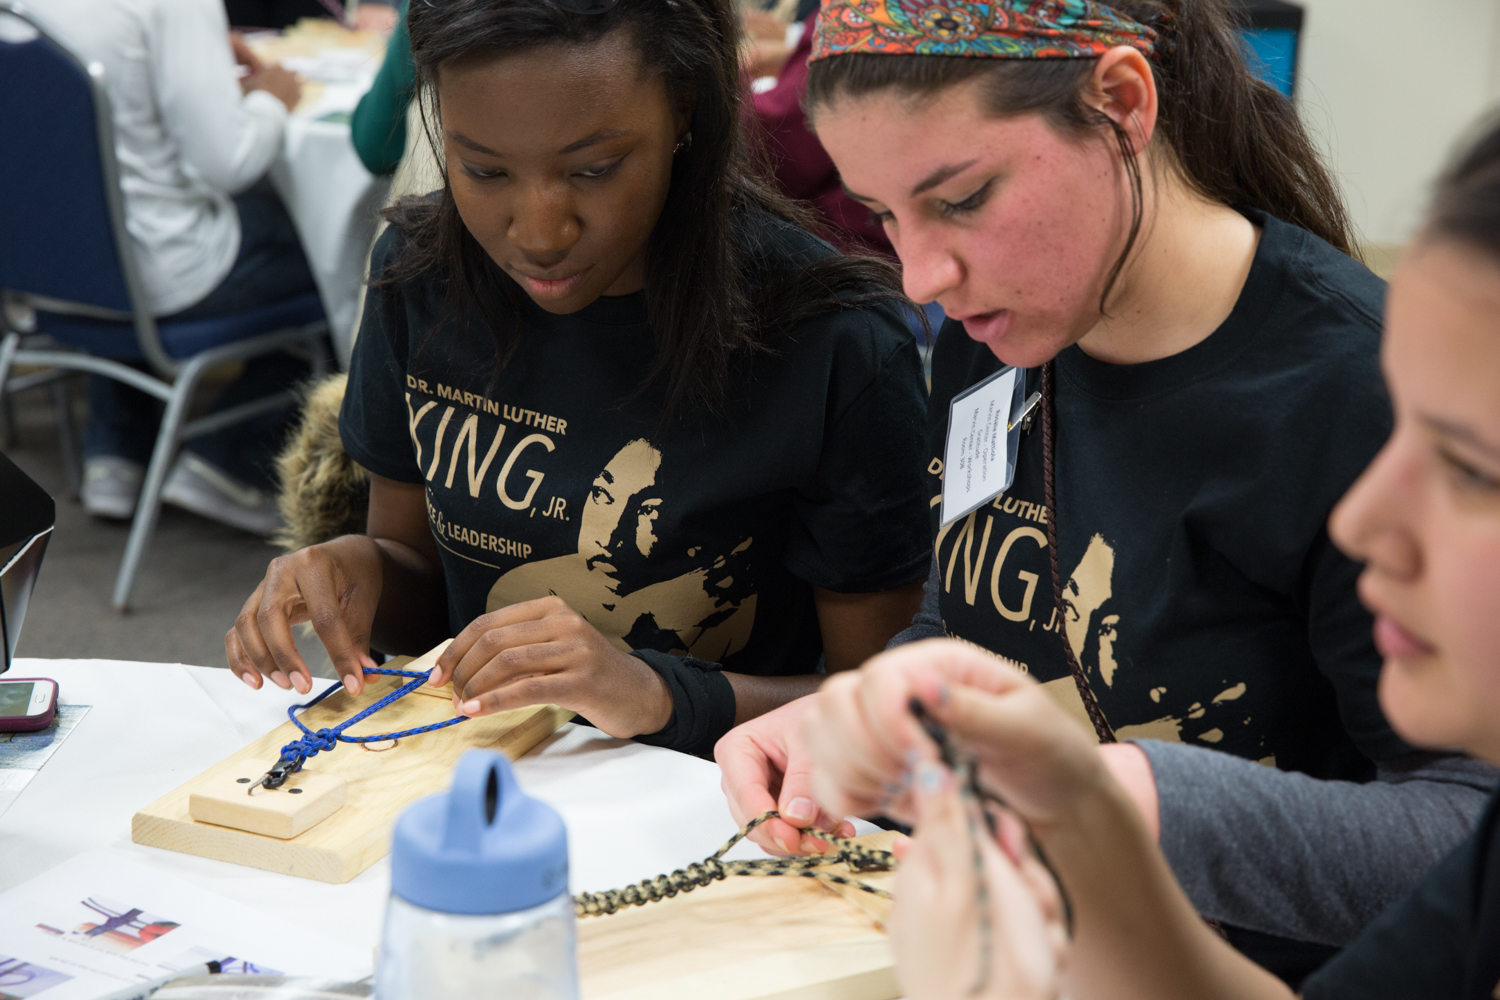 At Operation Survival, volunteers assembled paracord bracelets for active service military members.